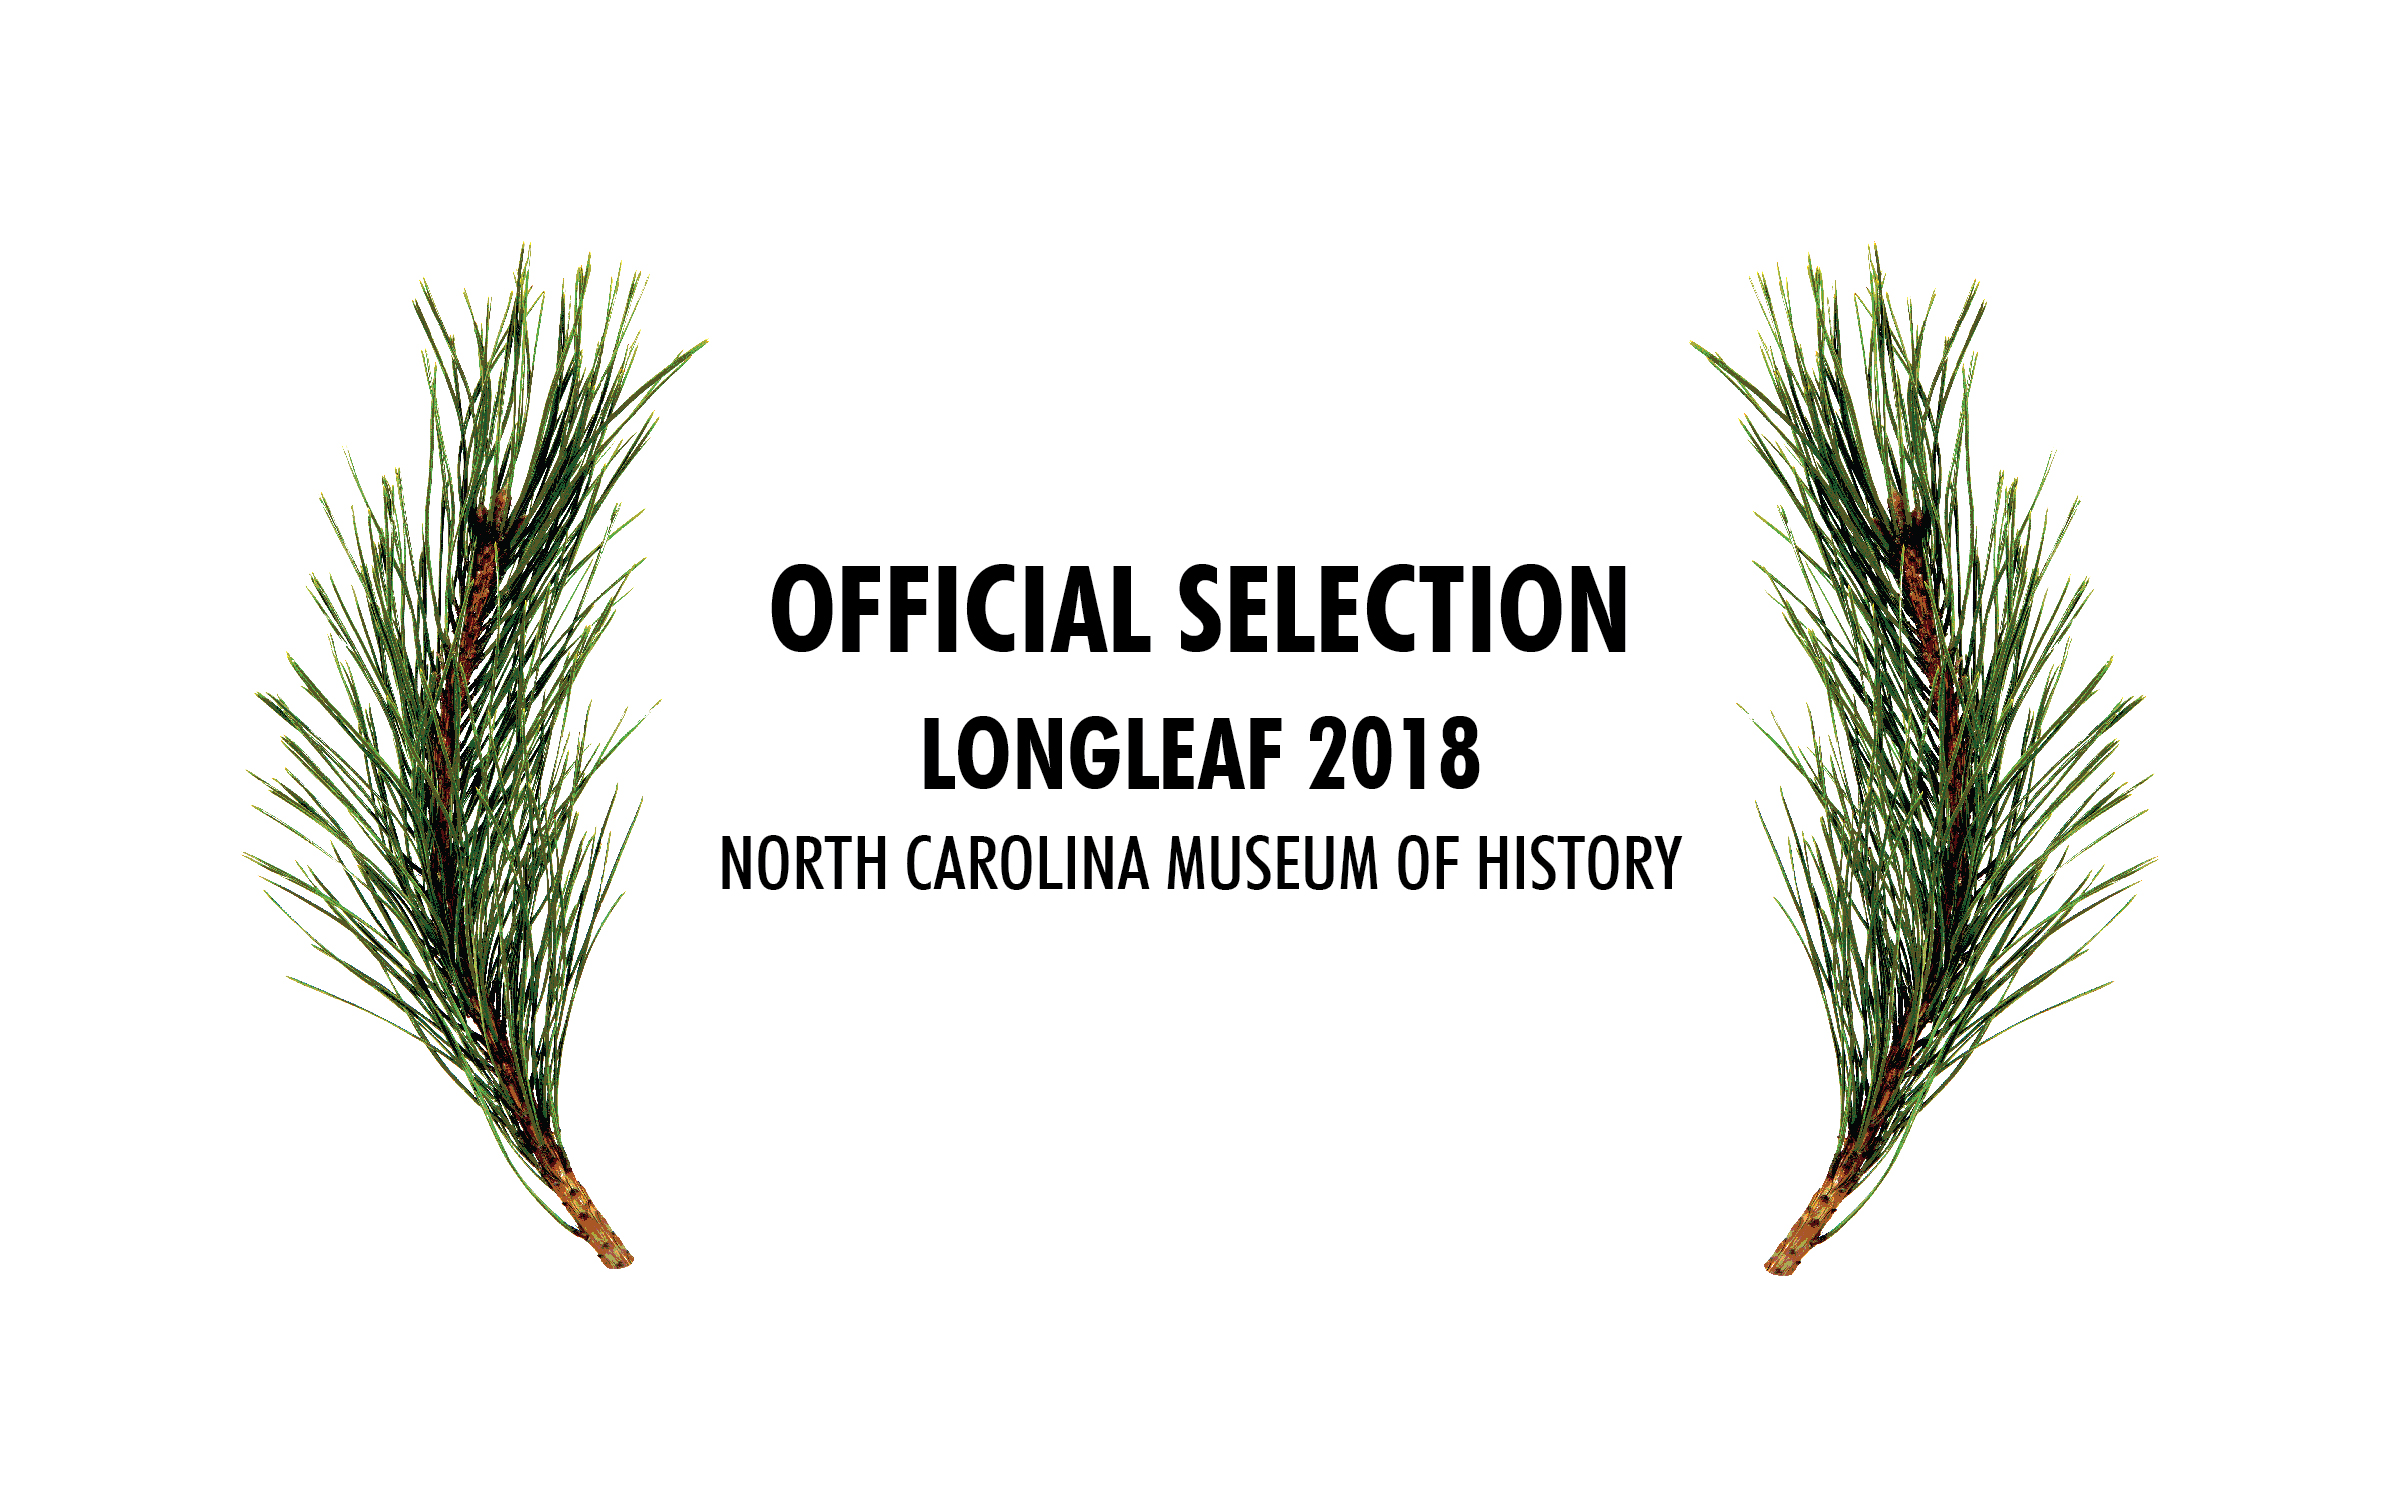 Official Selection laurel of Longleaf 2018, film festival of the North Carolina Museum of History